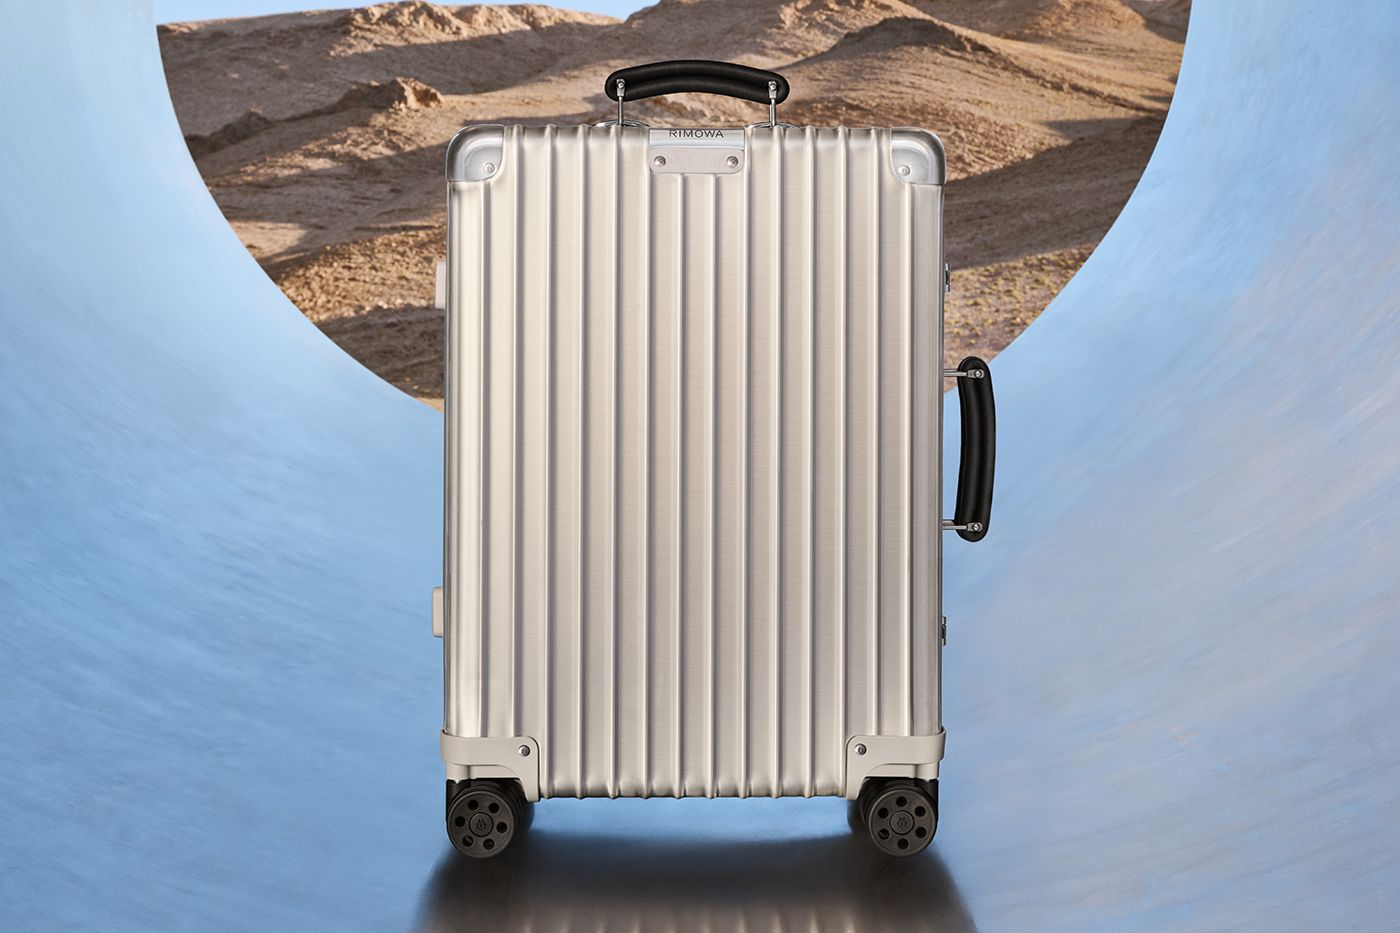 RIMOWA Ingenieurskunst  From Germany to the World Since 1898